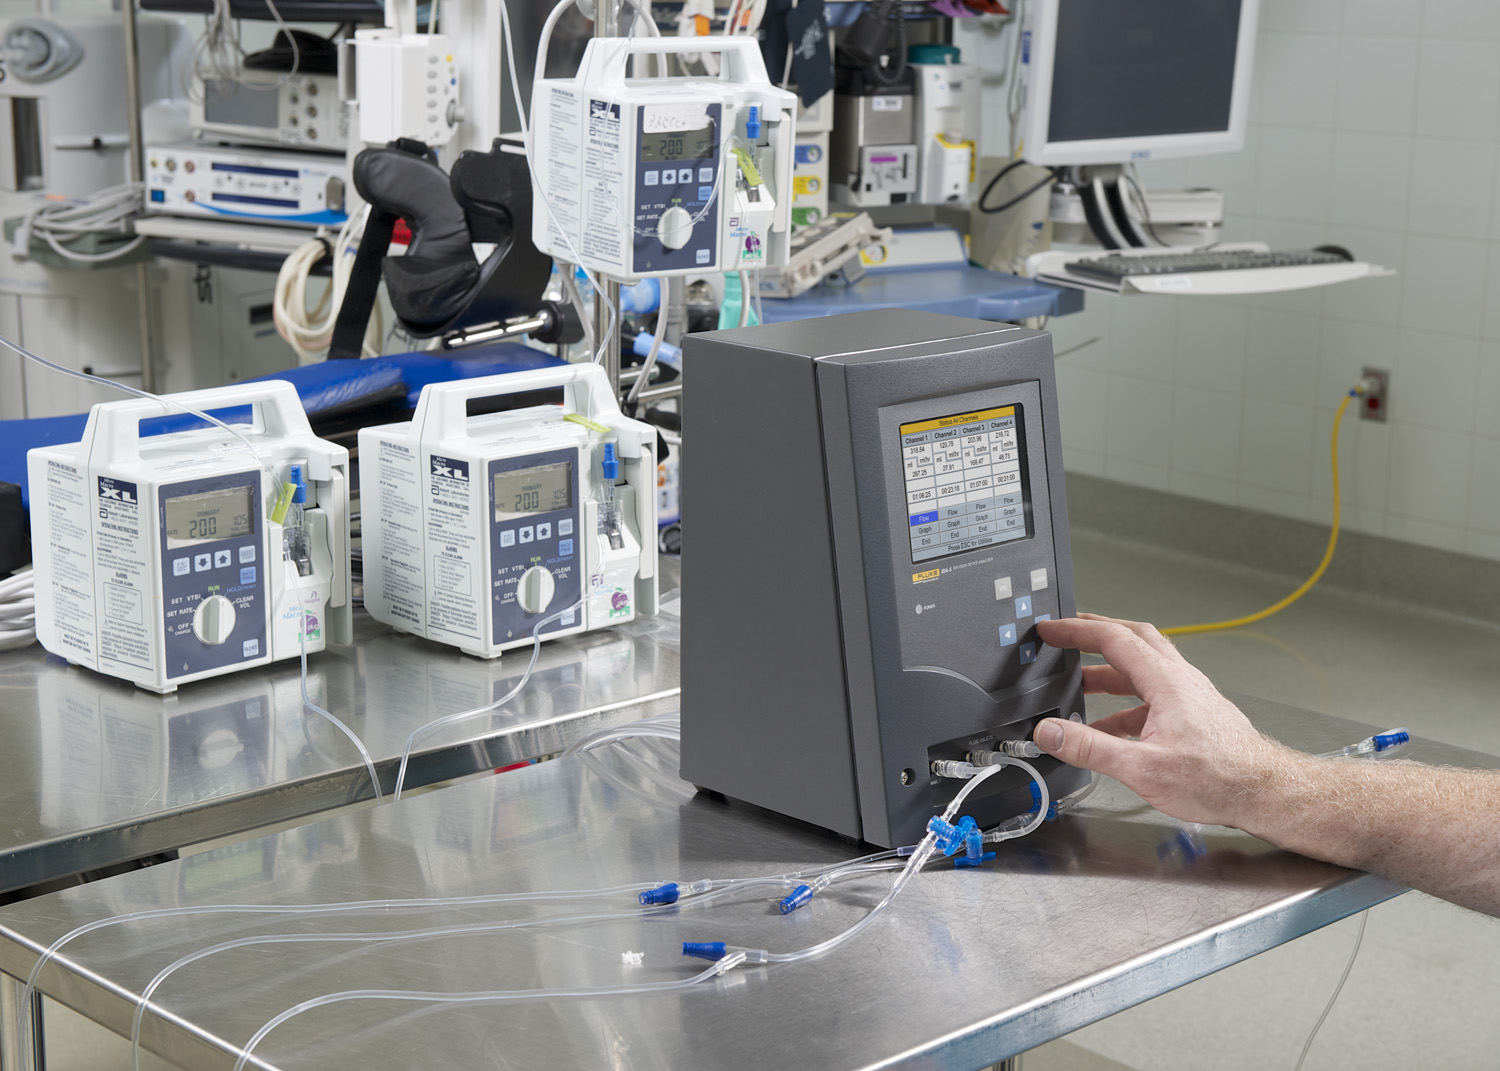 Medical device testing in a hospital